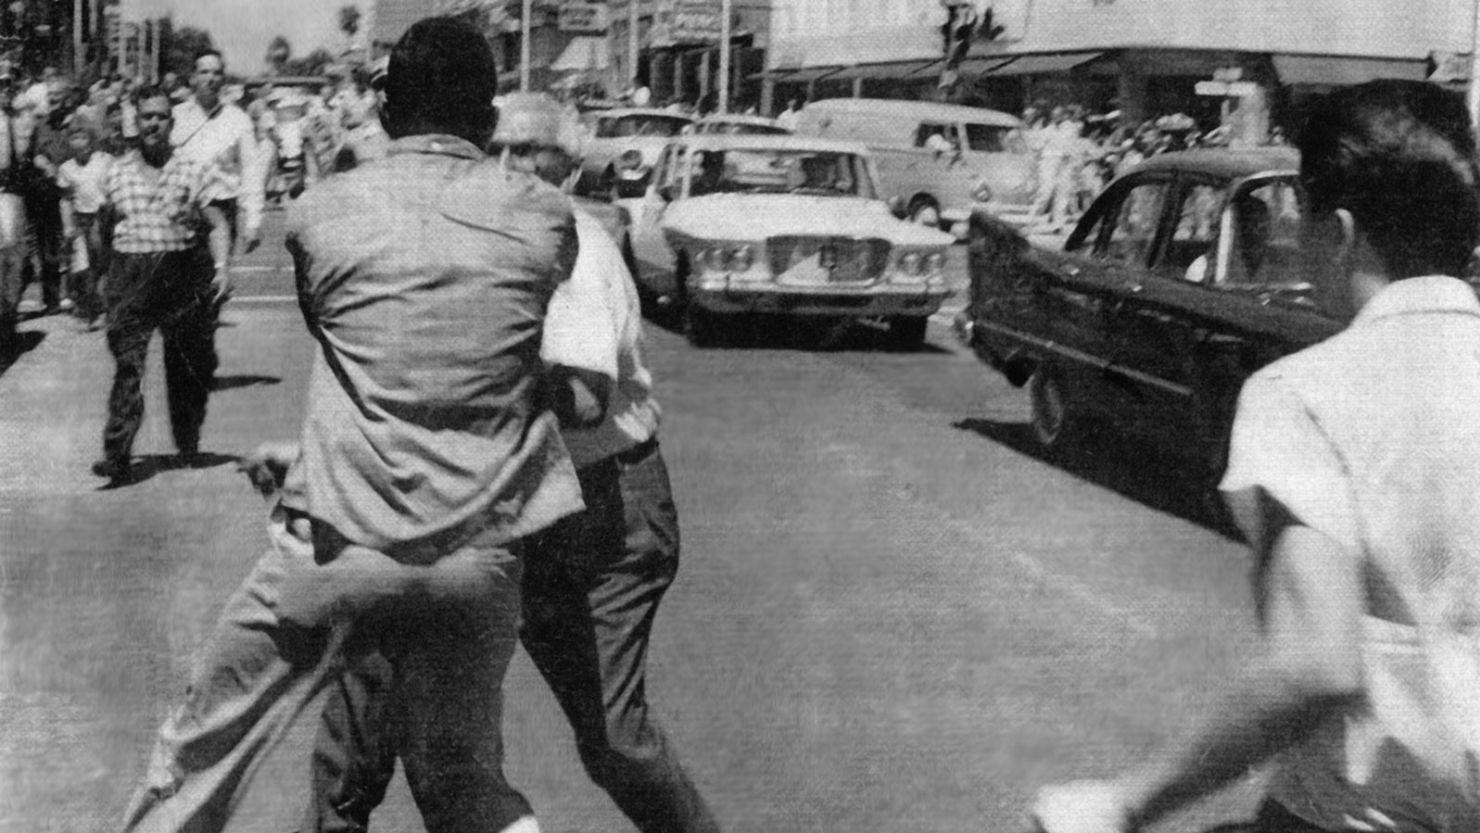 A man later identified as Charlie Griffin is accosted and later struck in the head with an ax handle on a downtown Jacksonville street during civil unrest on August 27, 1960.